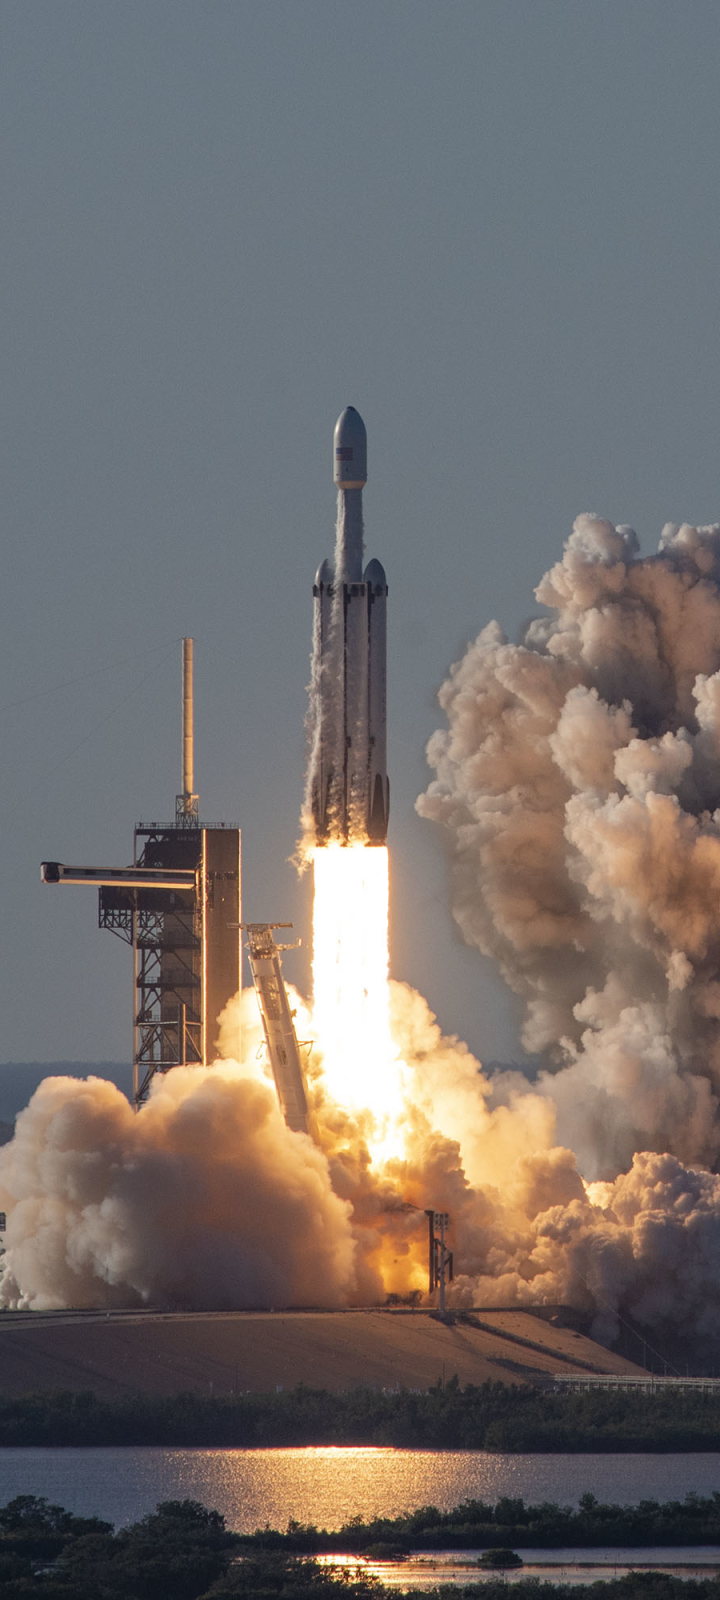 SpaceX Falcon Heavy - Arabsat 6A by SpaceX